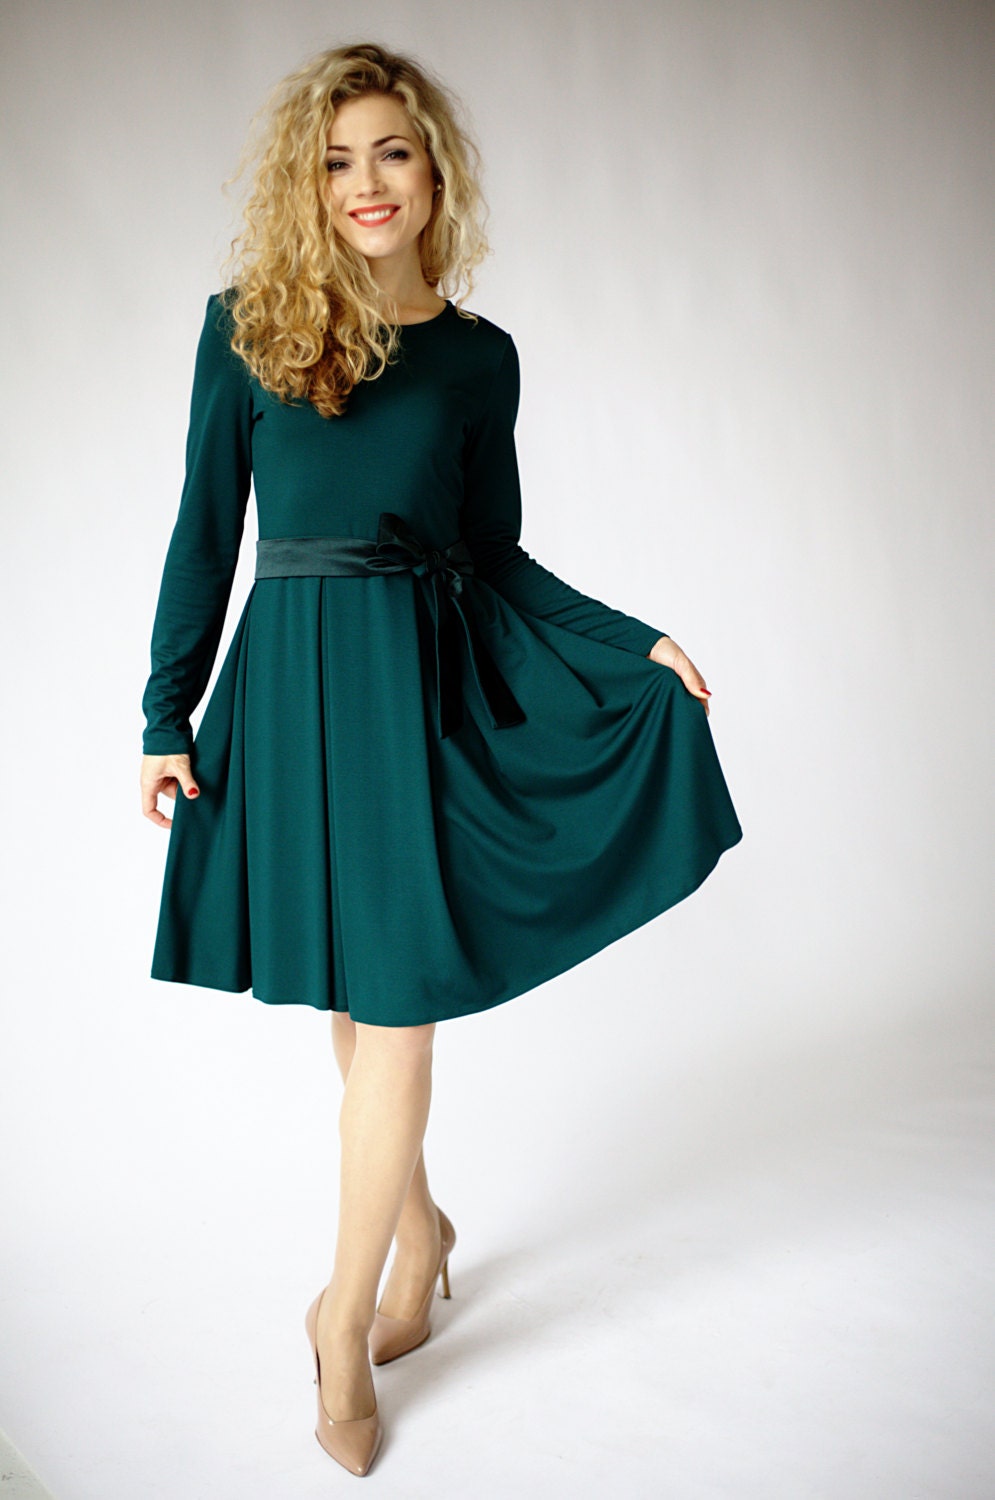 Green dress long sleeve dresses for women fit and flare